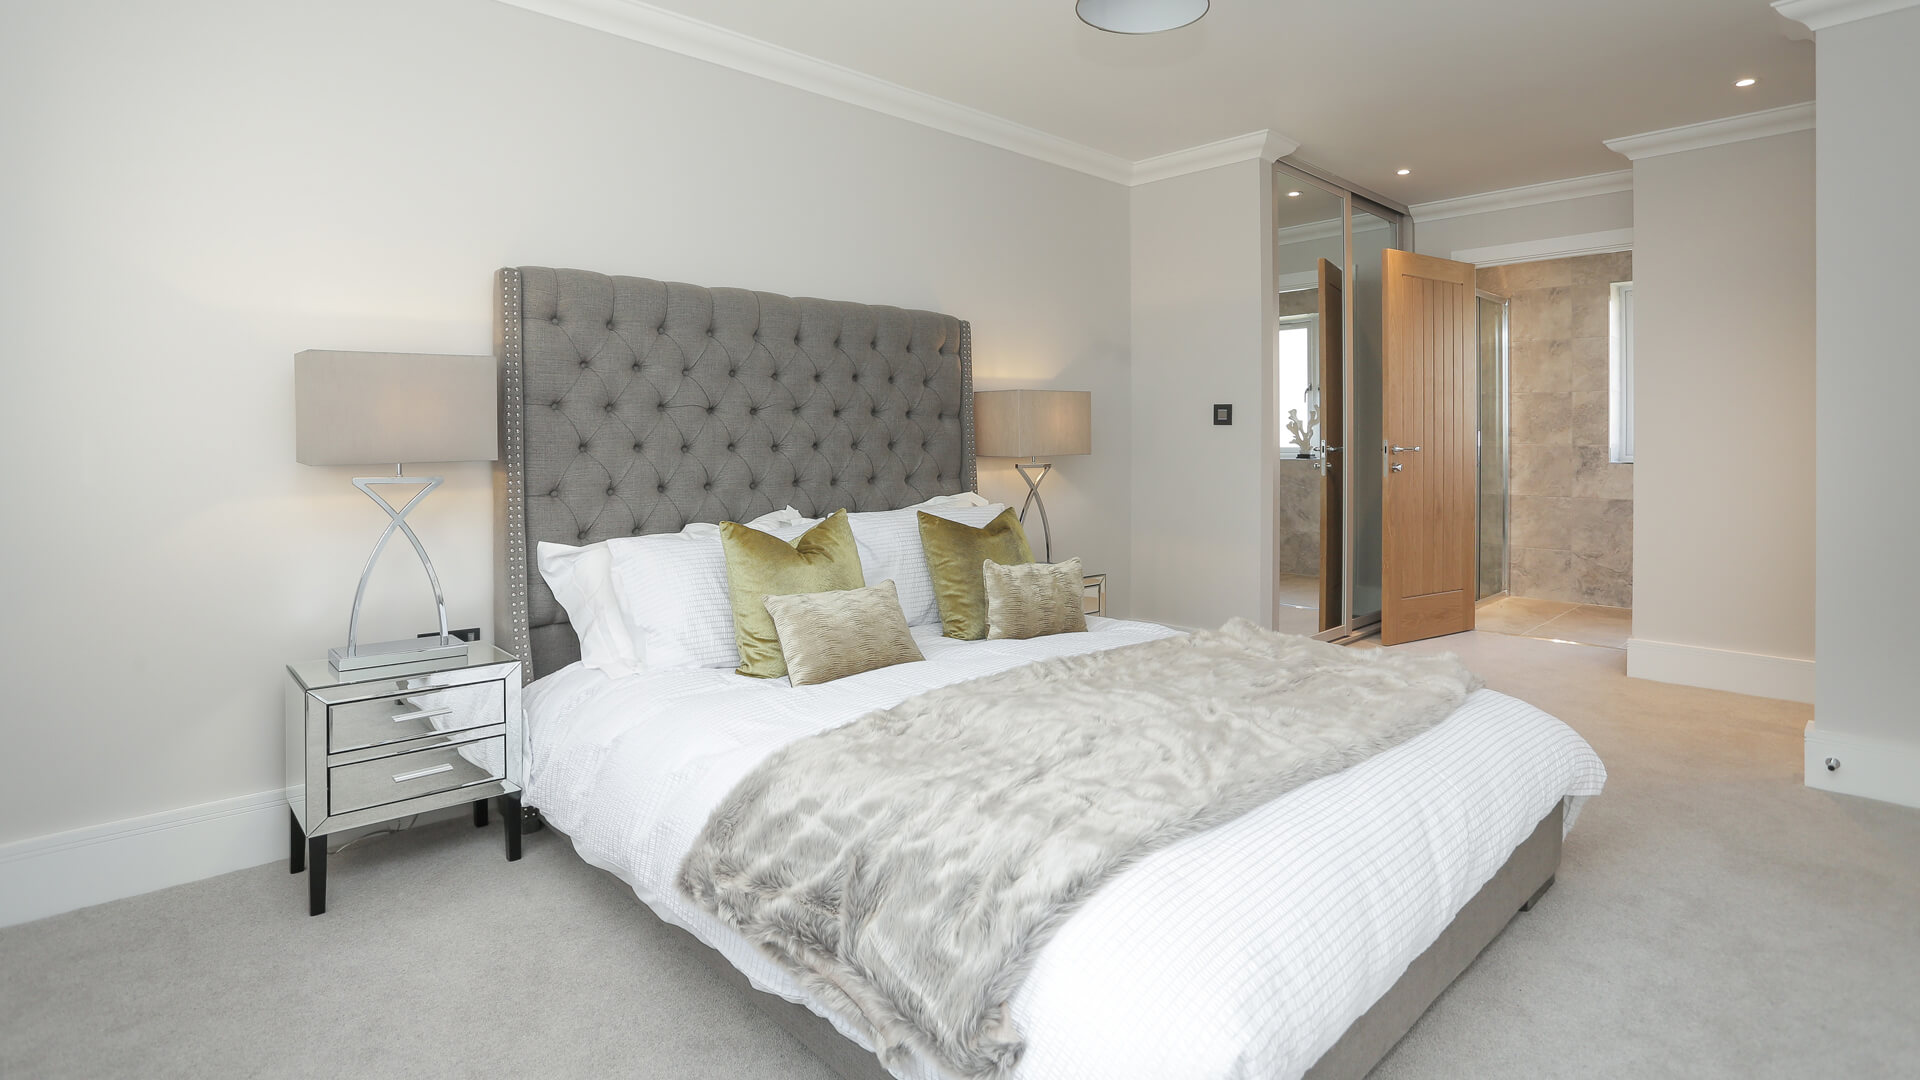 Dressed double bed in master bedroom at Woodside court.